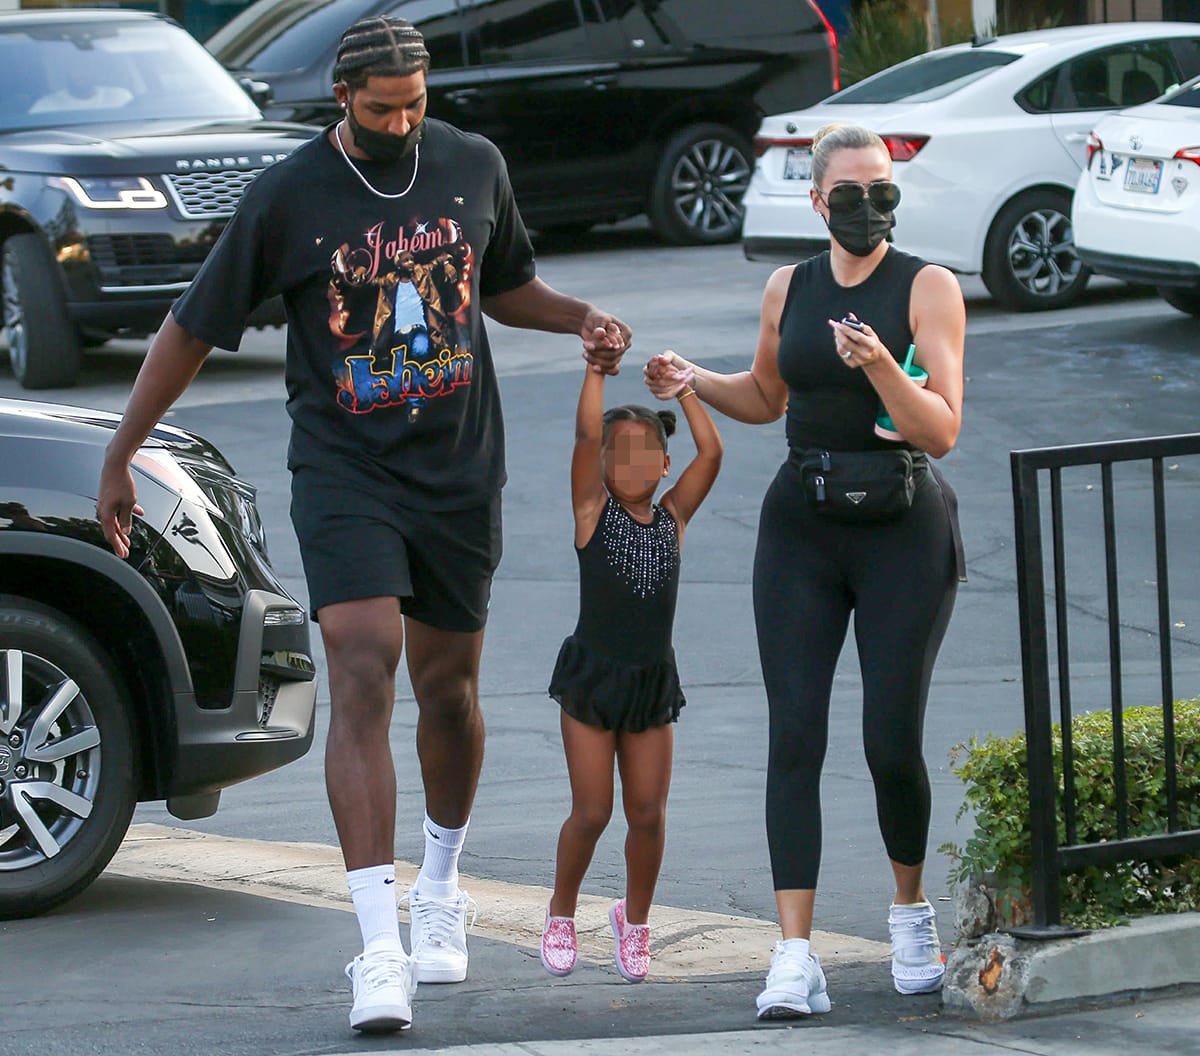 Tristan Thompson is Khloe Kardashian's baby daddy, with whom she shares children True, 4, and a newborn son